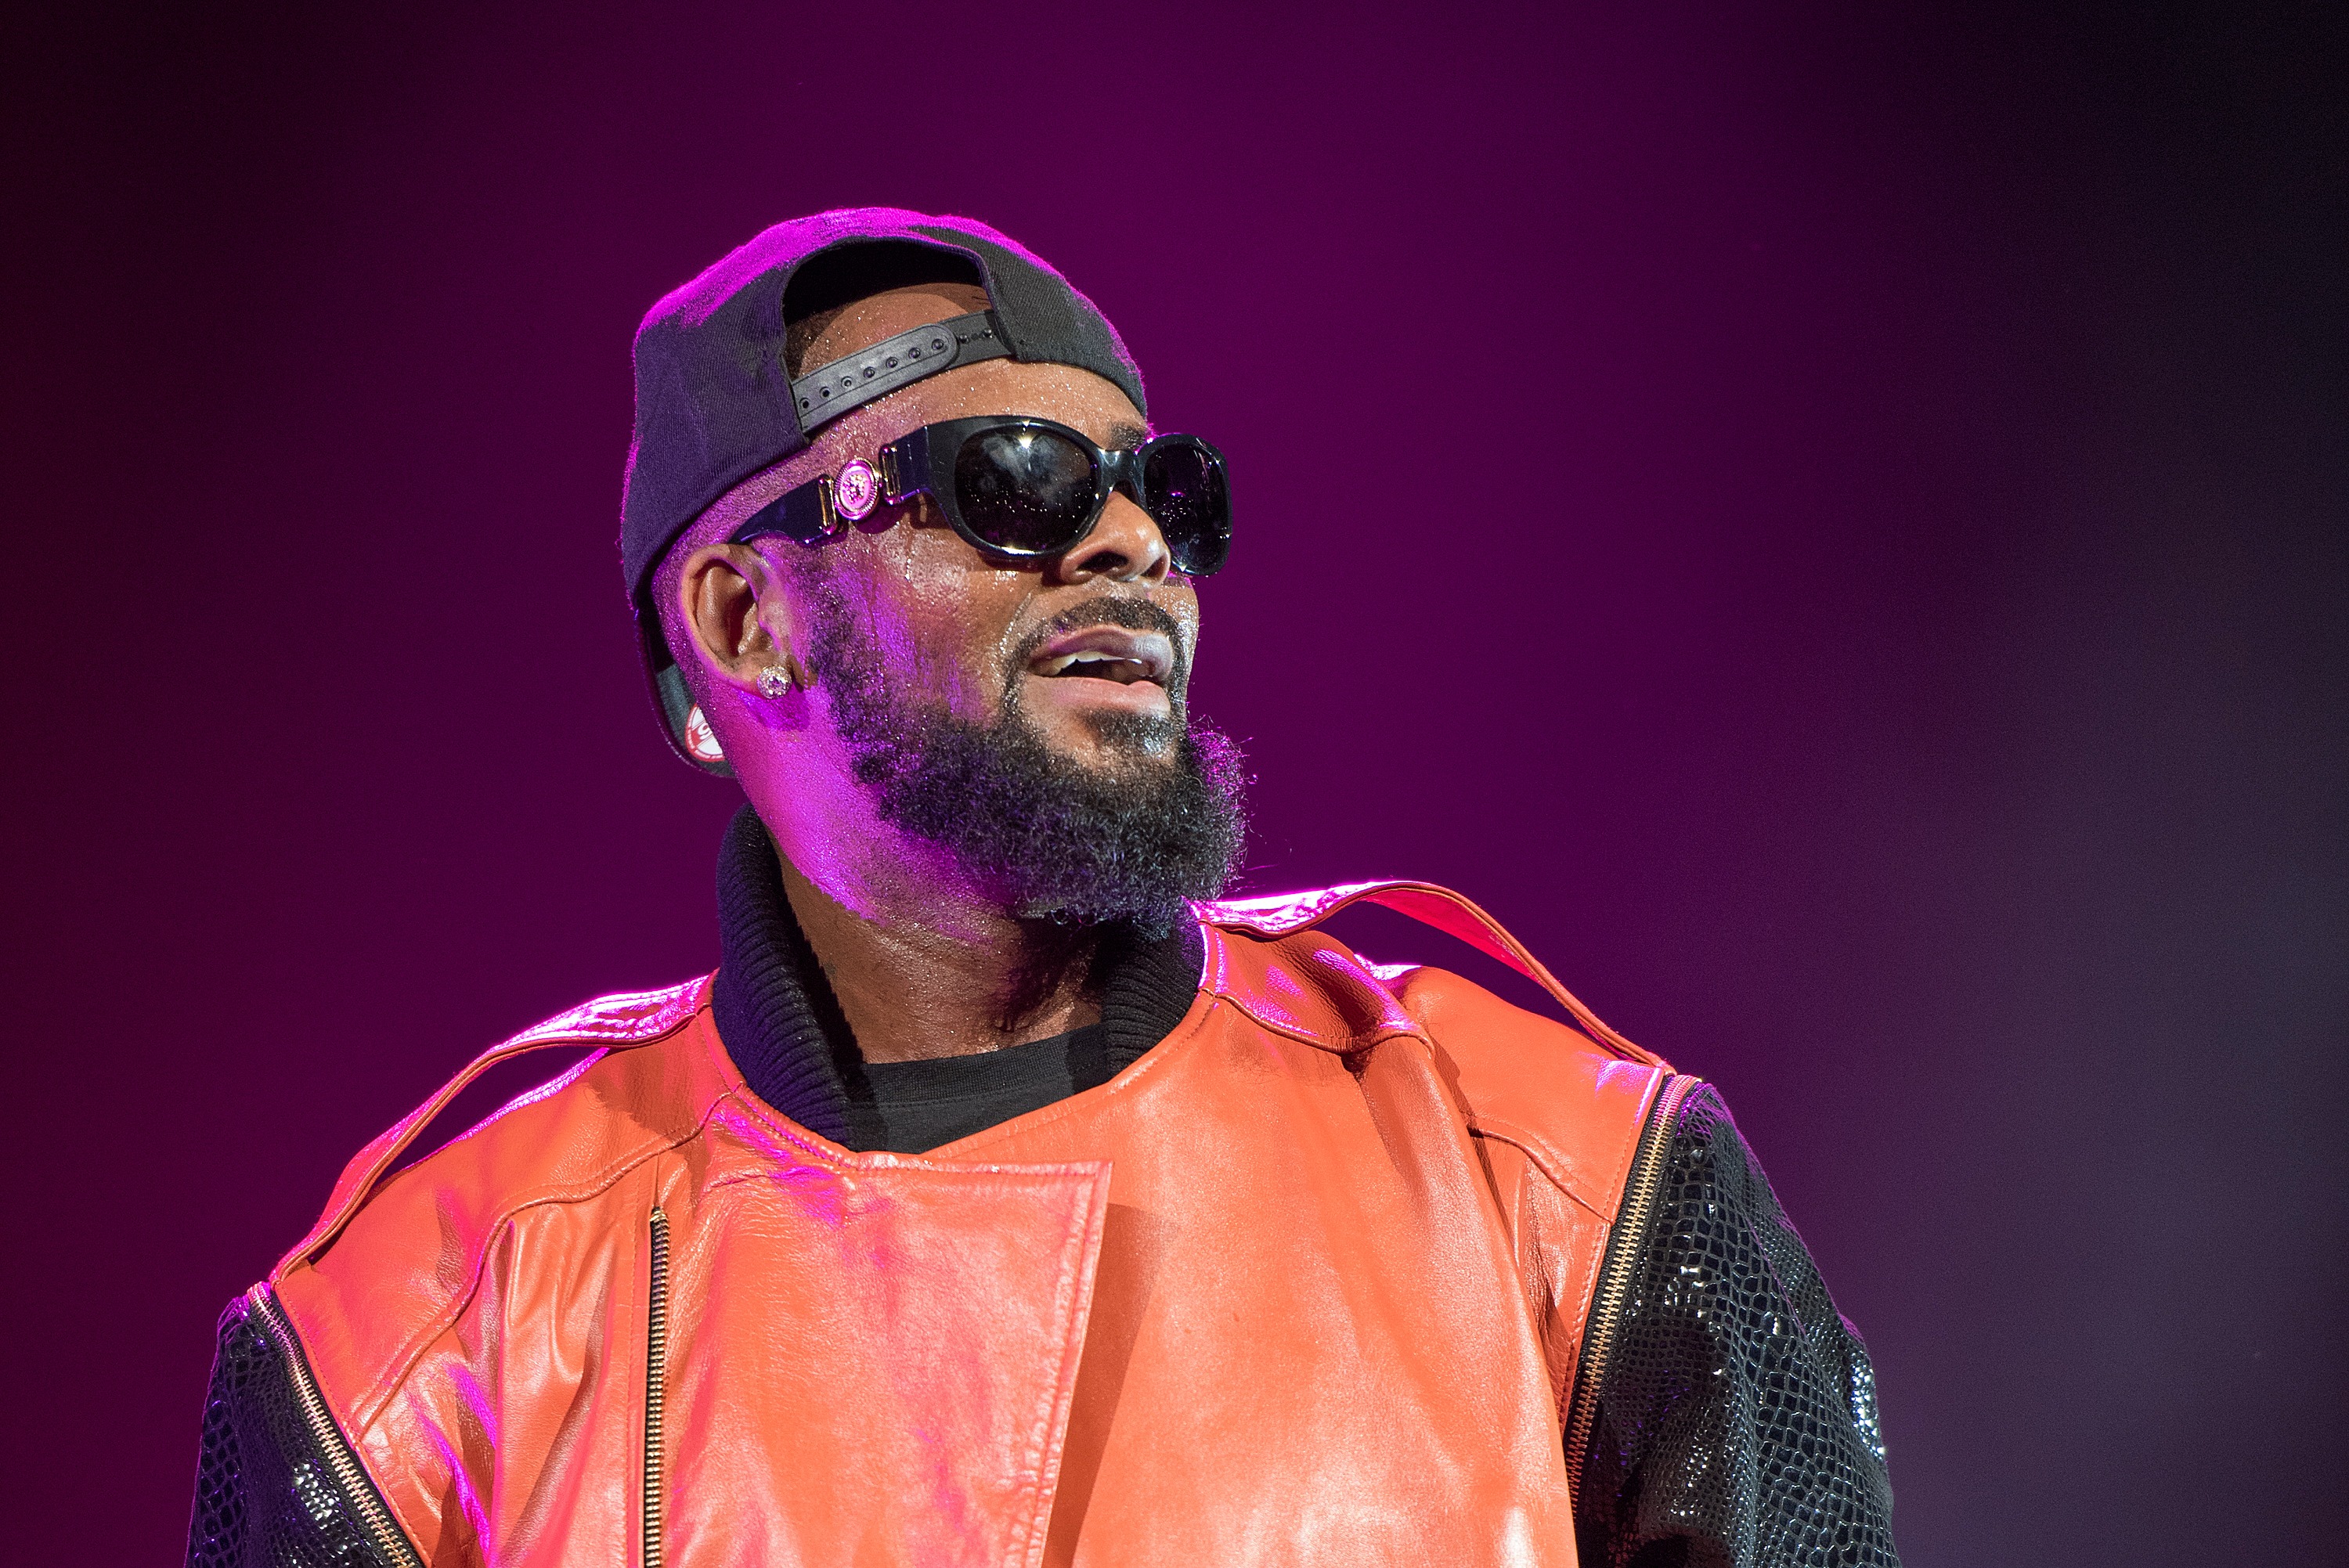 R. Kelly’s Ex-Wife Claims He Withheld Child Support Payments To Control Her